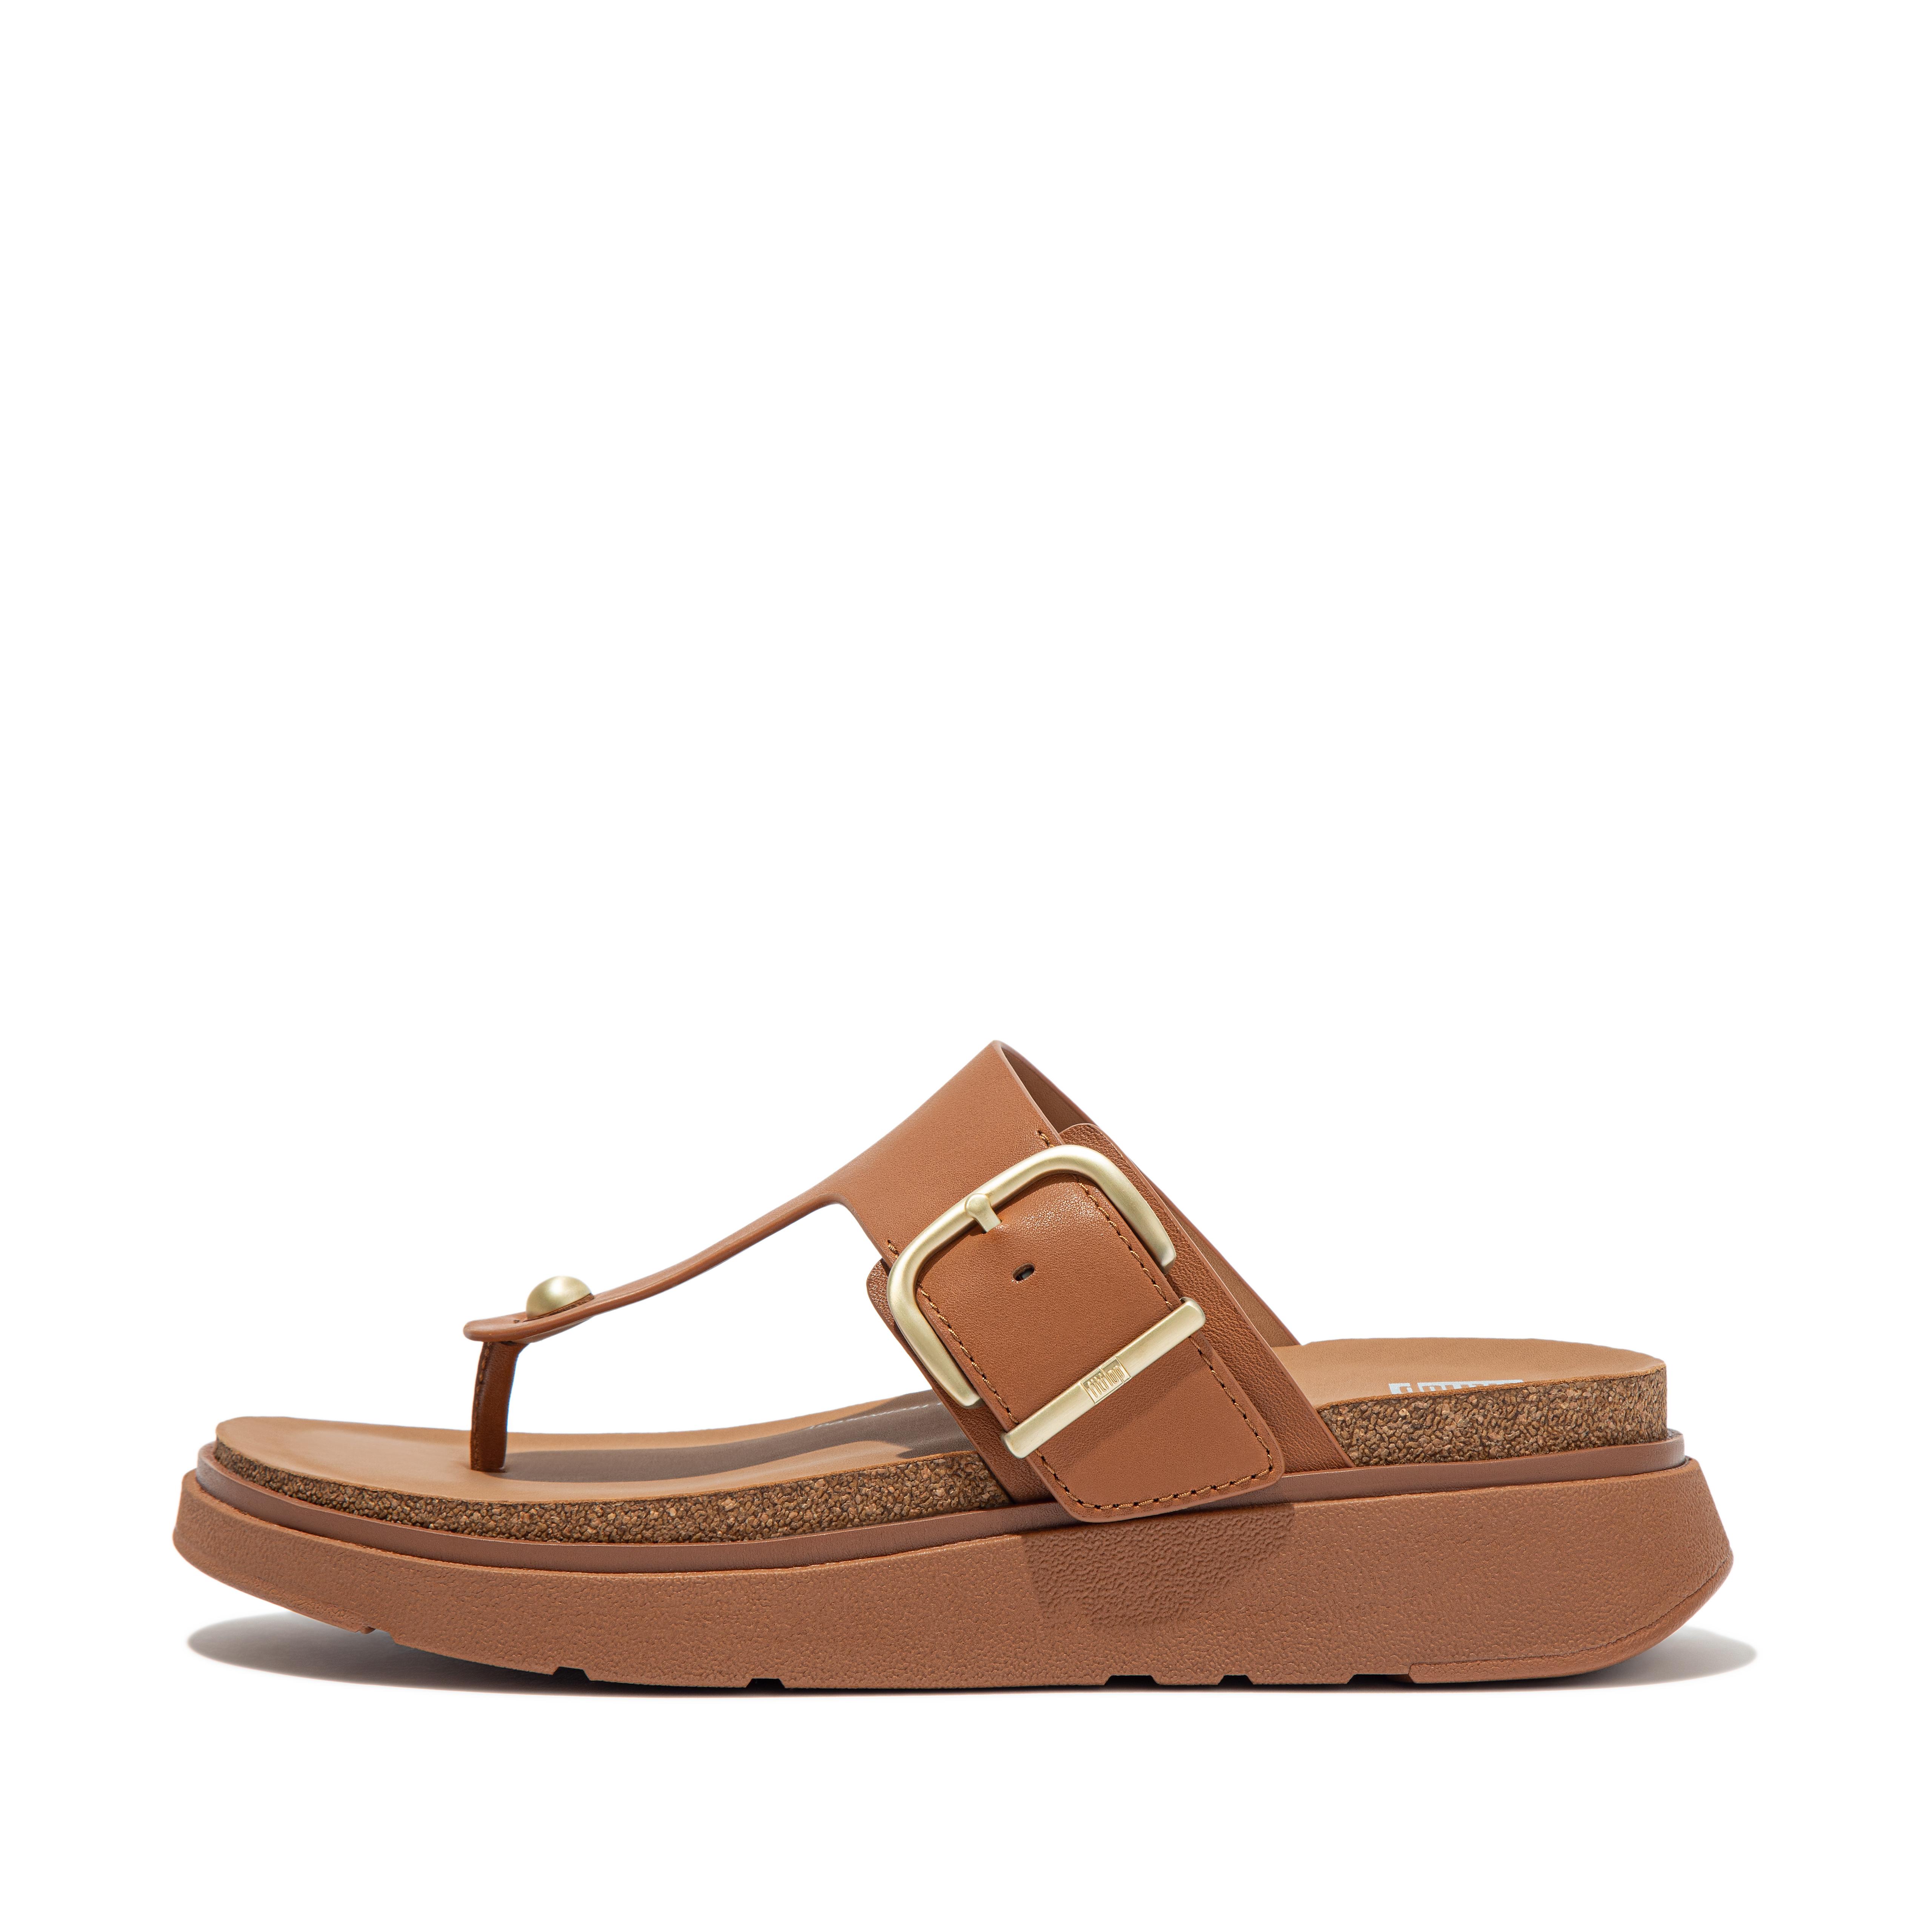 Fitflop Buckle Leather Toe-Post Sandals,Light Tan